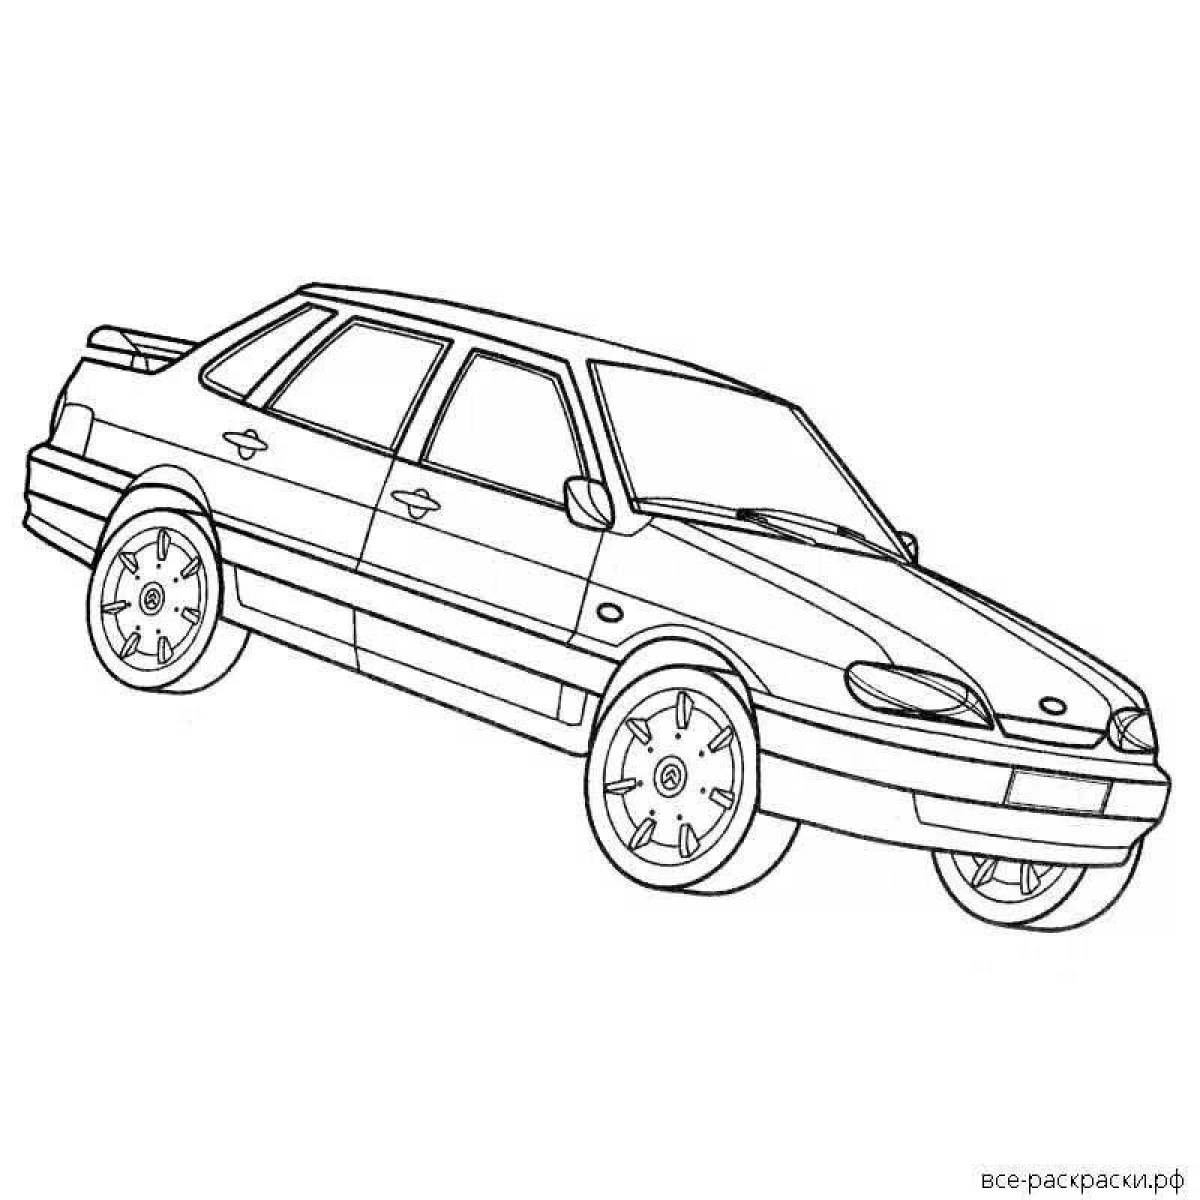 Fine cars coloring book fret cars